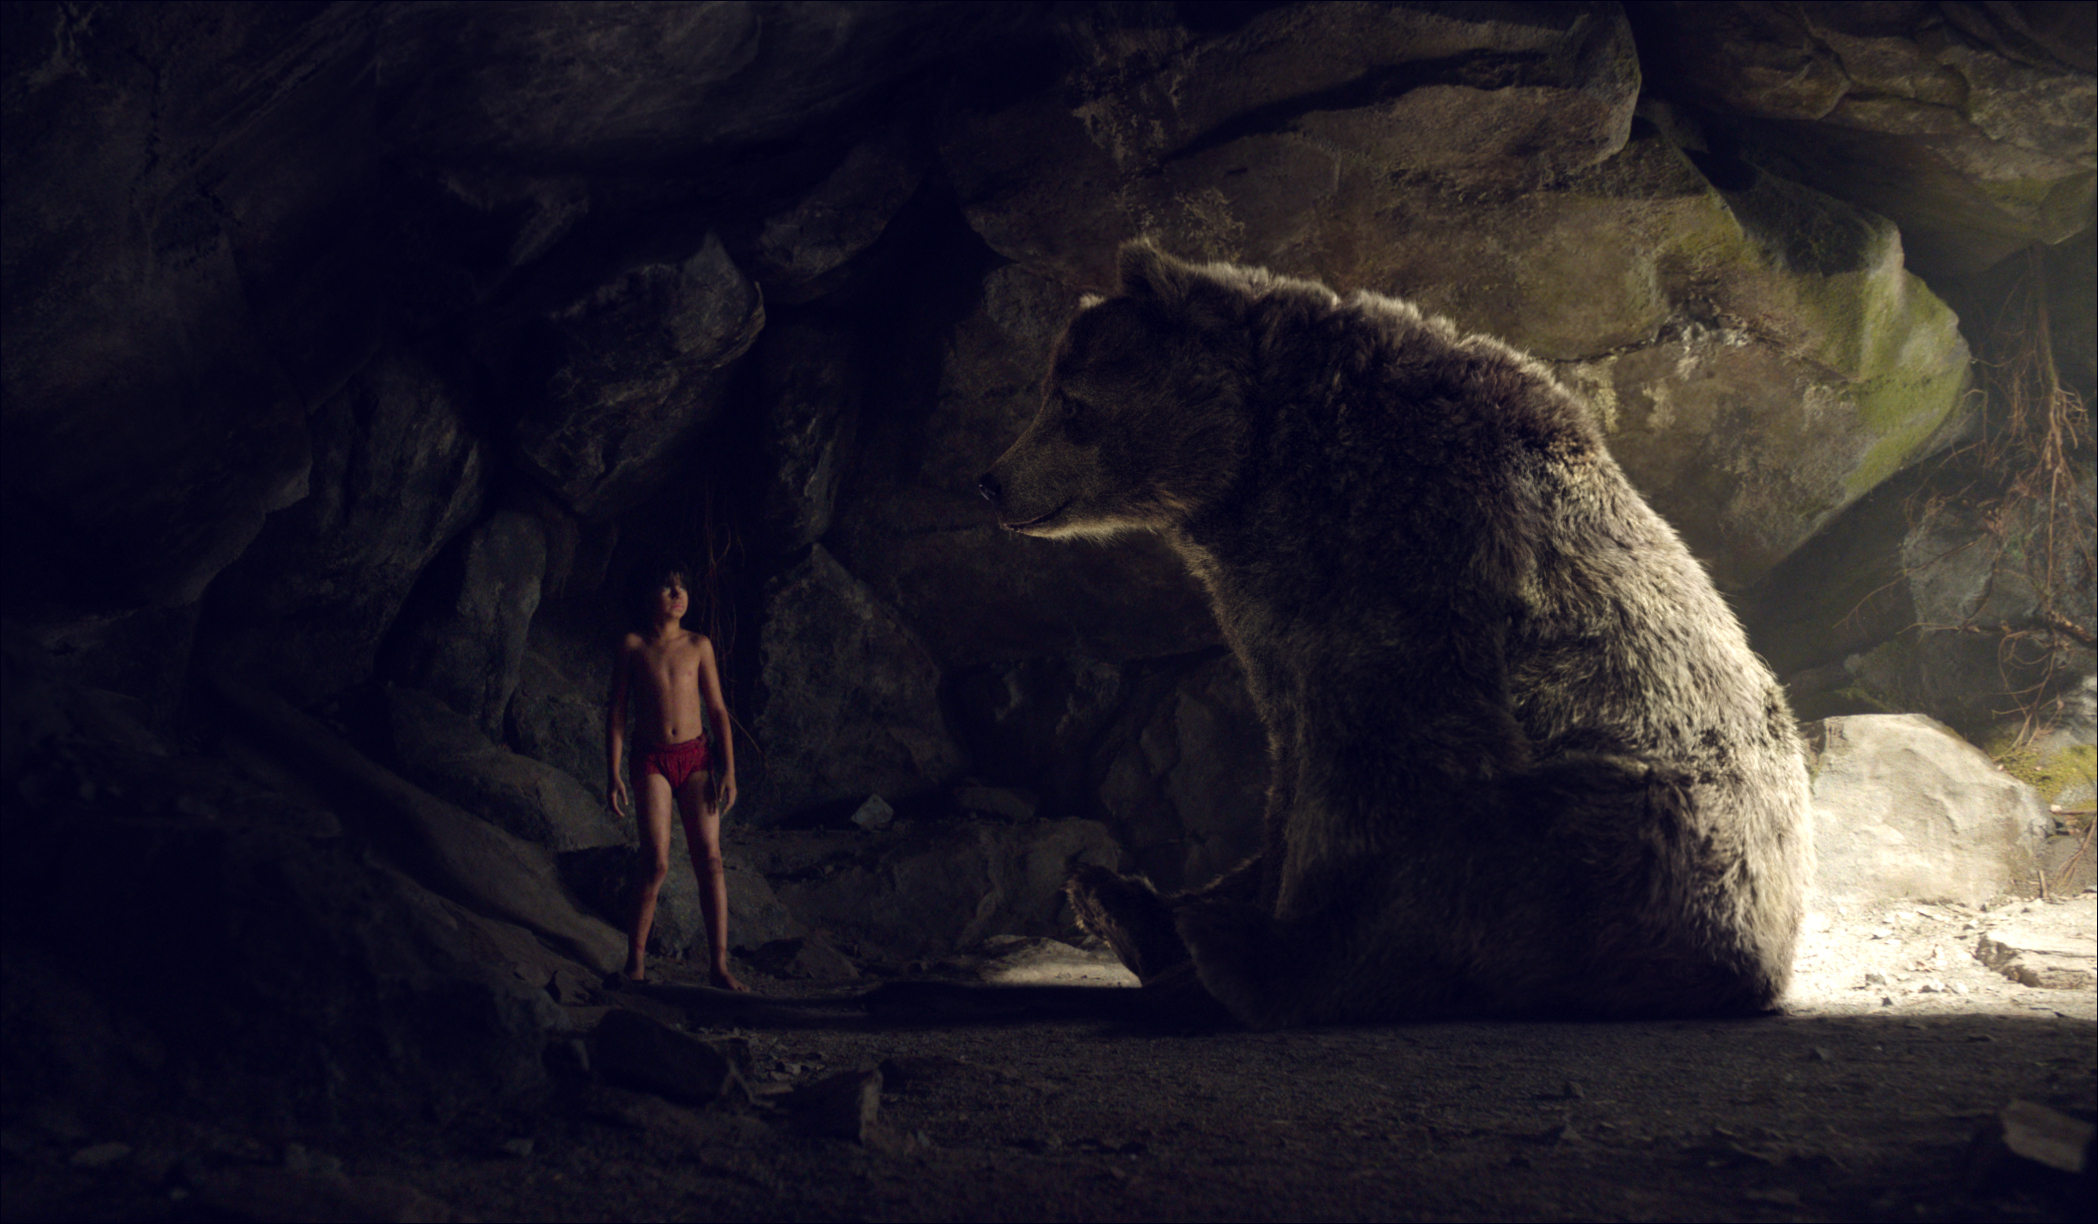 The Jungle Book (2016) Wallpapers, Pictures, Images2098 x 1224